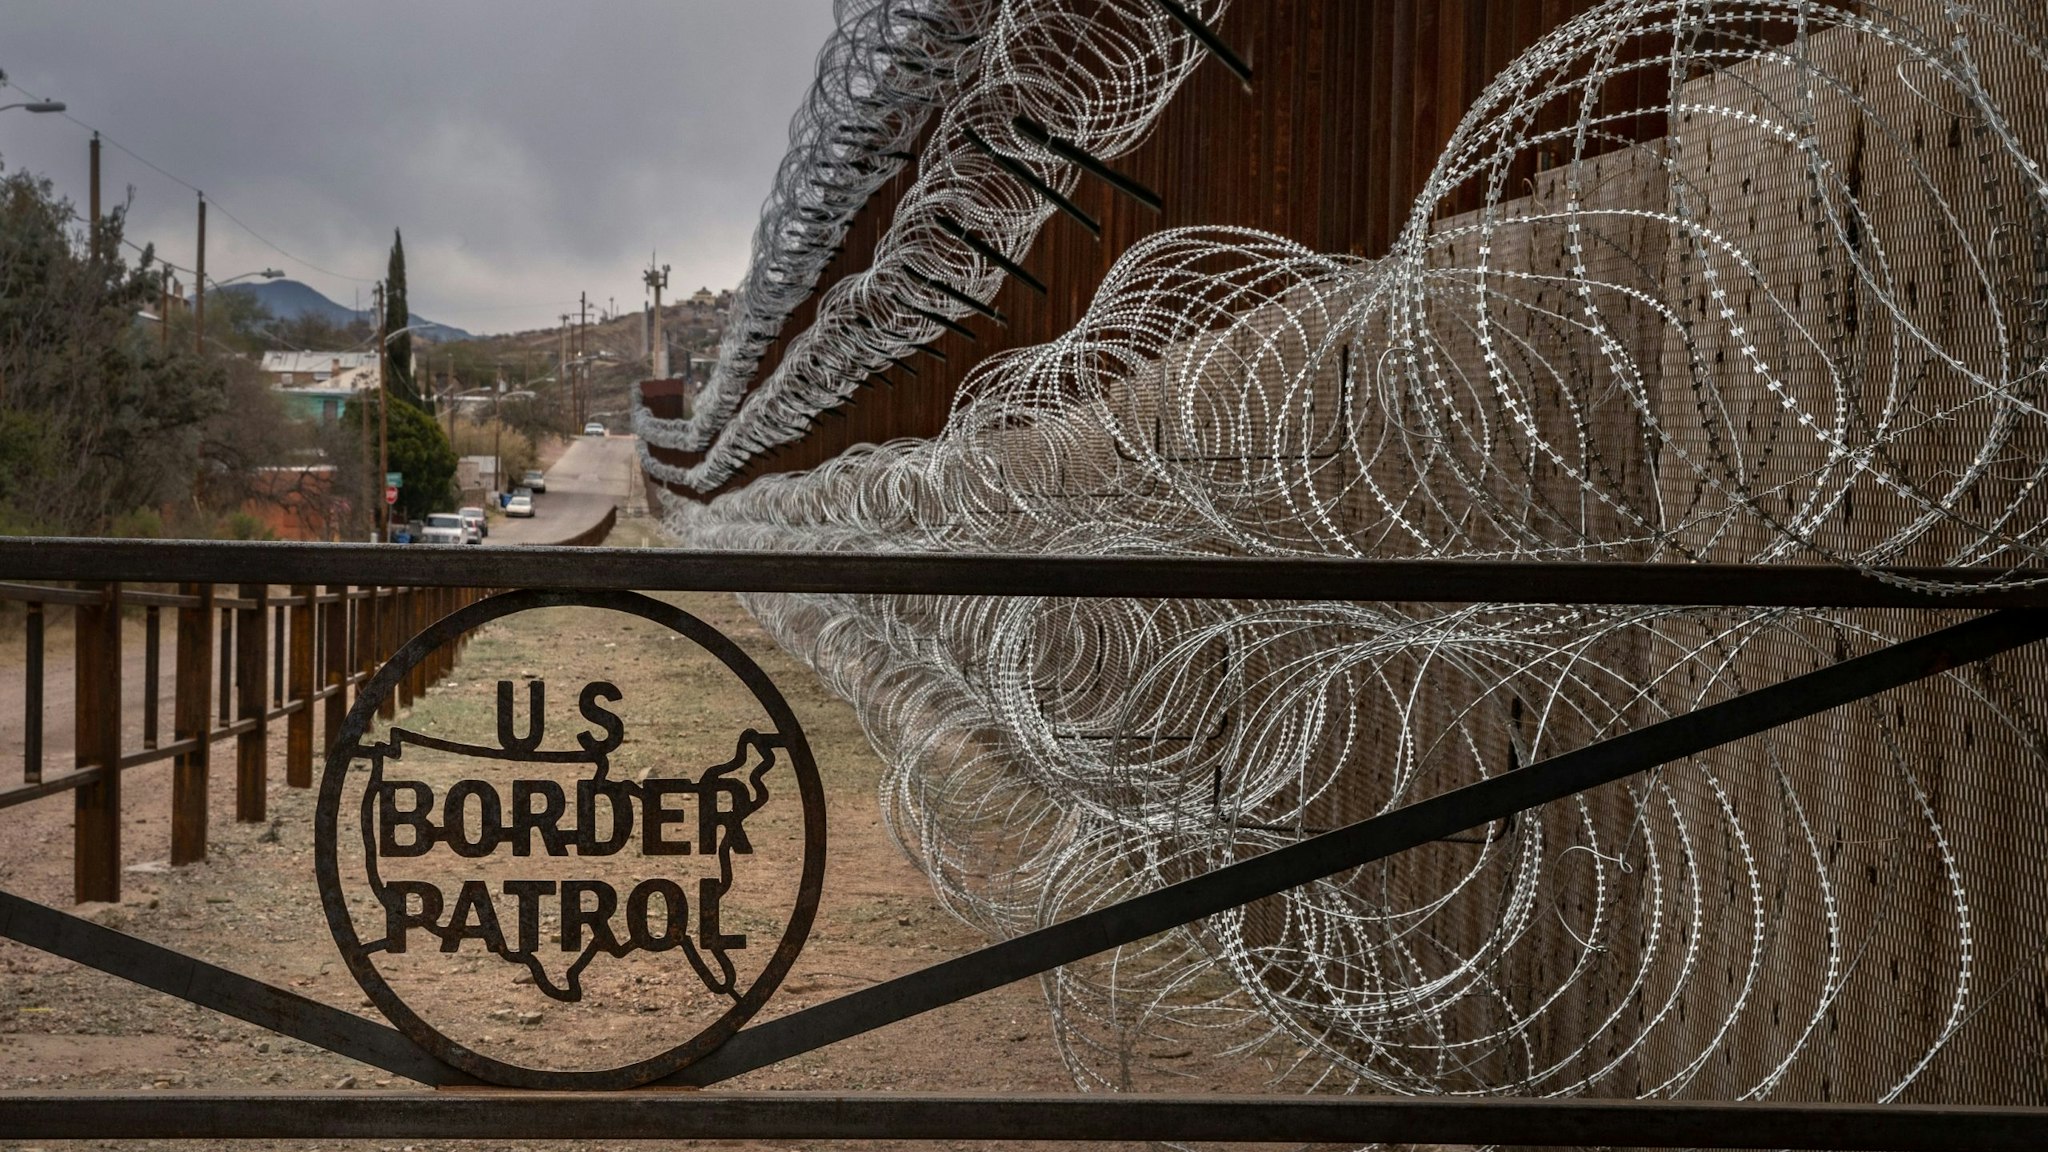 TOPSHOT - A metal fence marked with the US Border Patrol sign prevents people to get close to the barbed/concertina wire covering the US/Mexico border fence, in Nogales, Arizona, on February 9, 2019. (Photo by Ariana Drehsler / AFP) (Photo credit should read ARIANA DREHSLER/AFP via Getty Images)